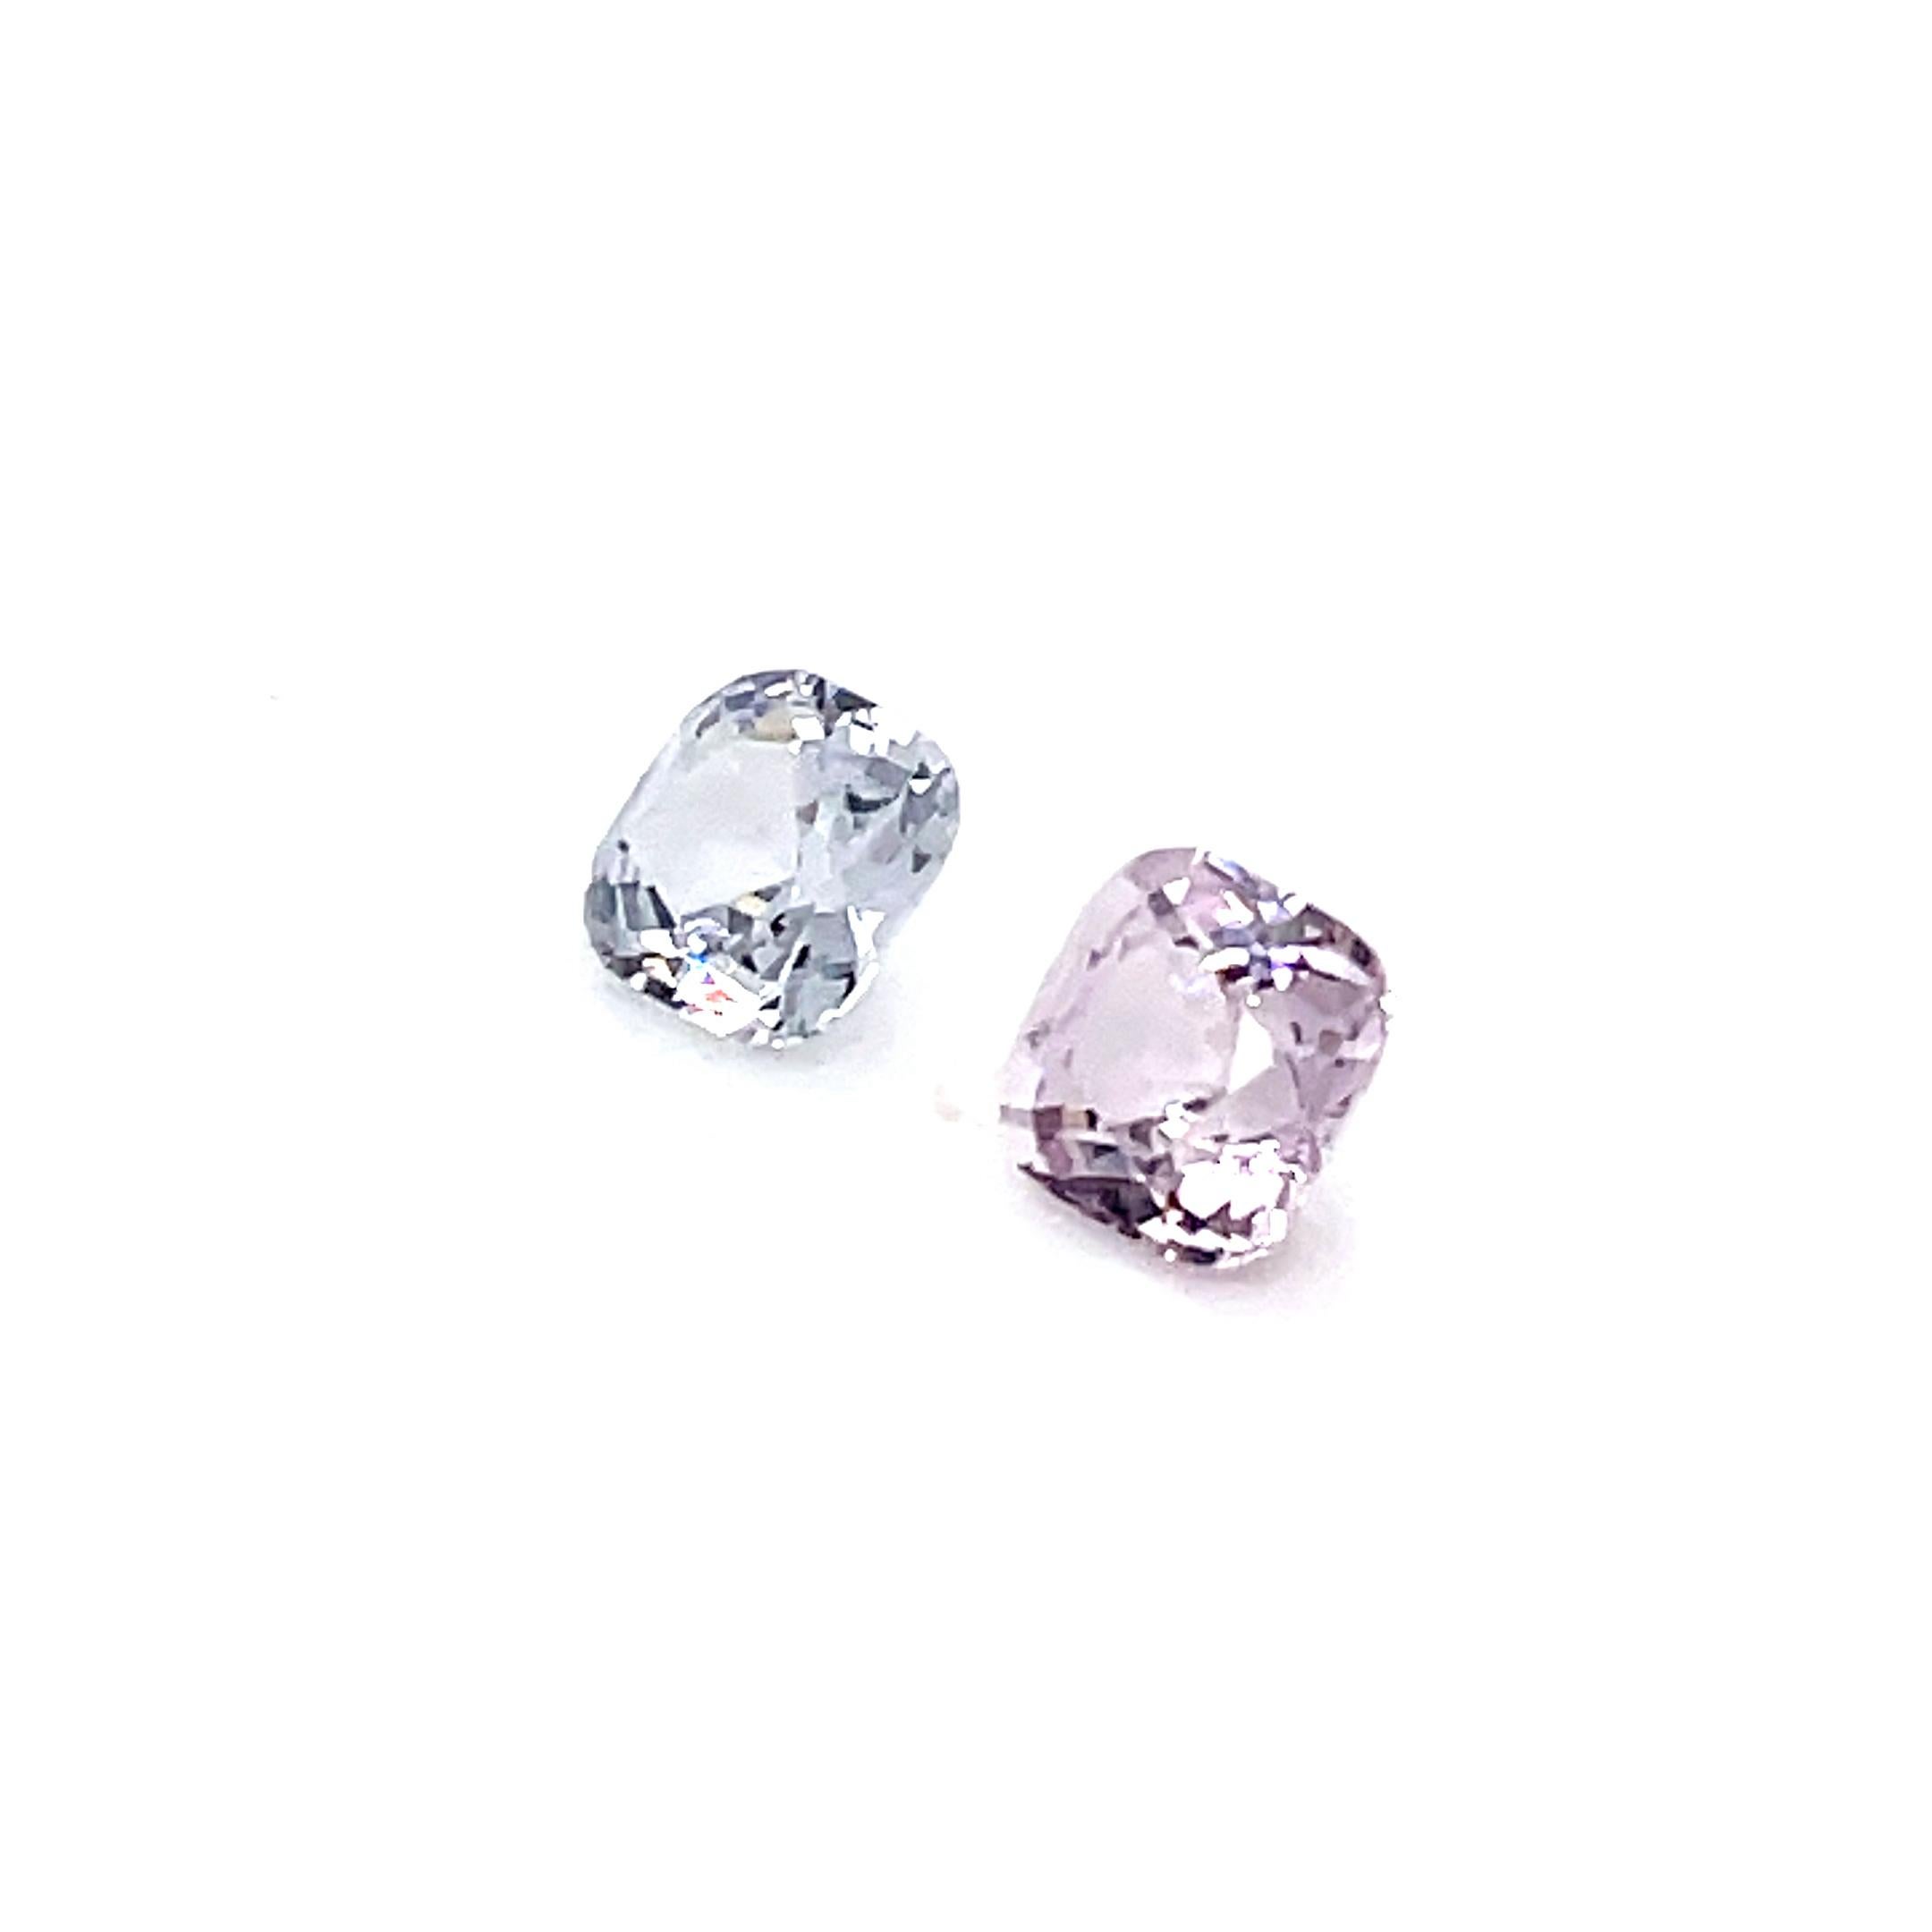 Contemporary 2 Grayish Pink Spinel Cts 2.73 Perfect Matching Pair Unheated For Sale